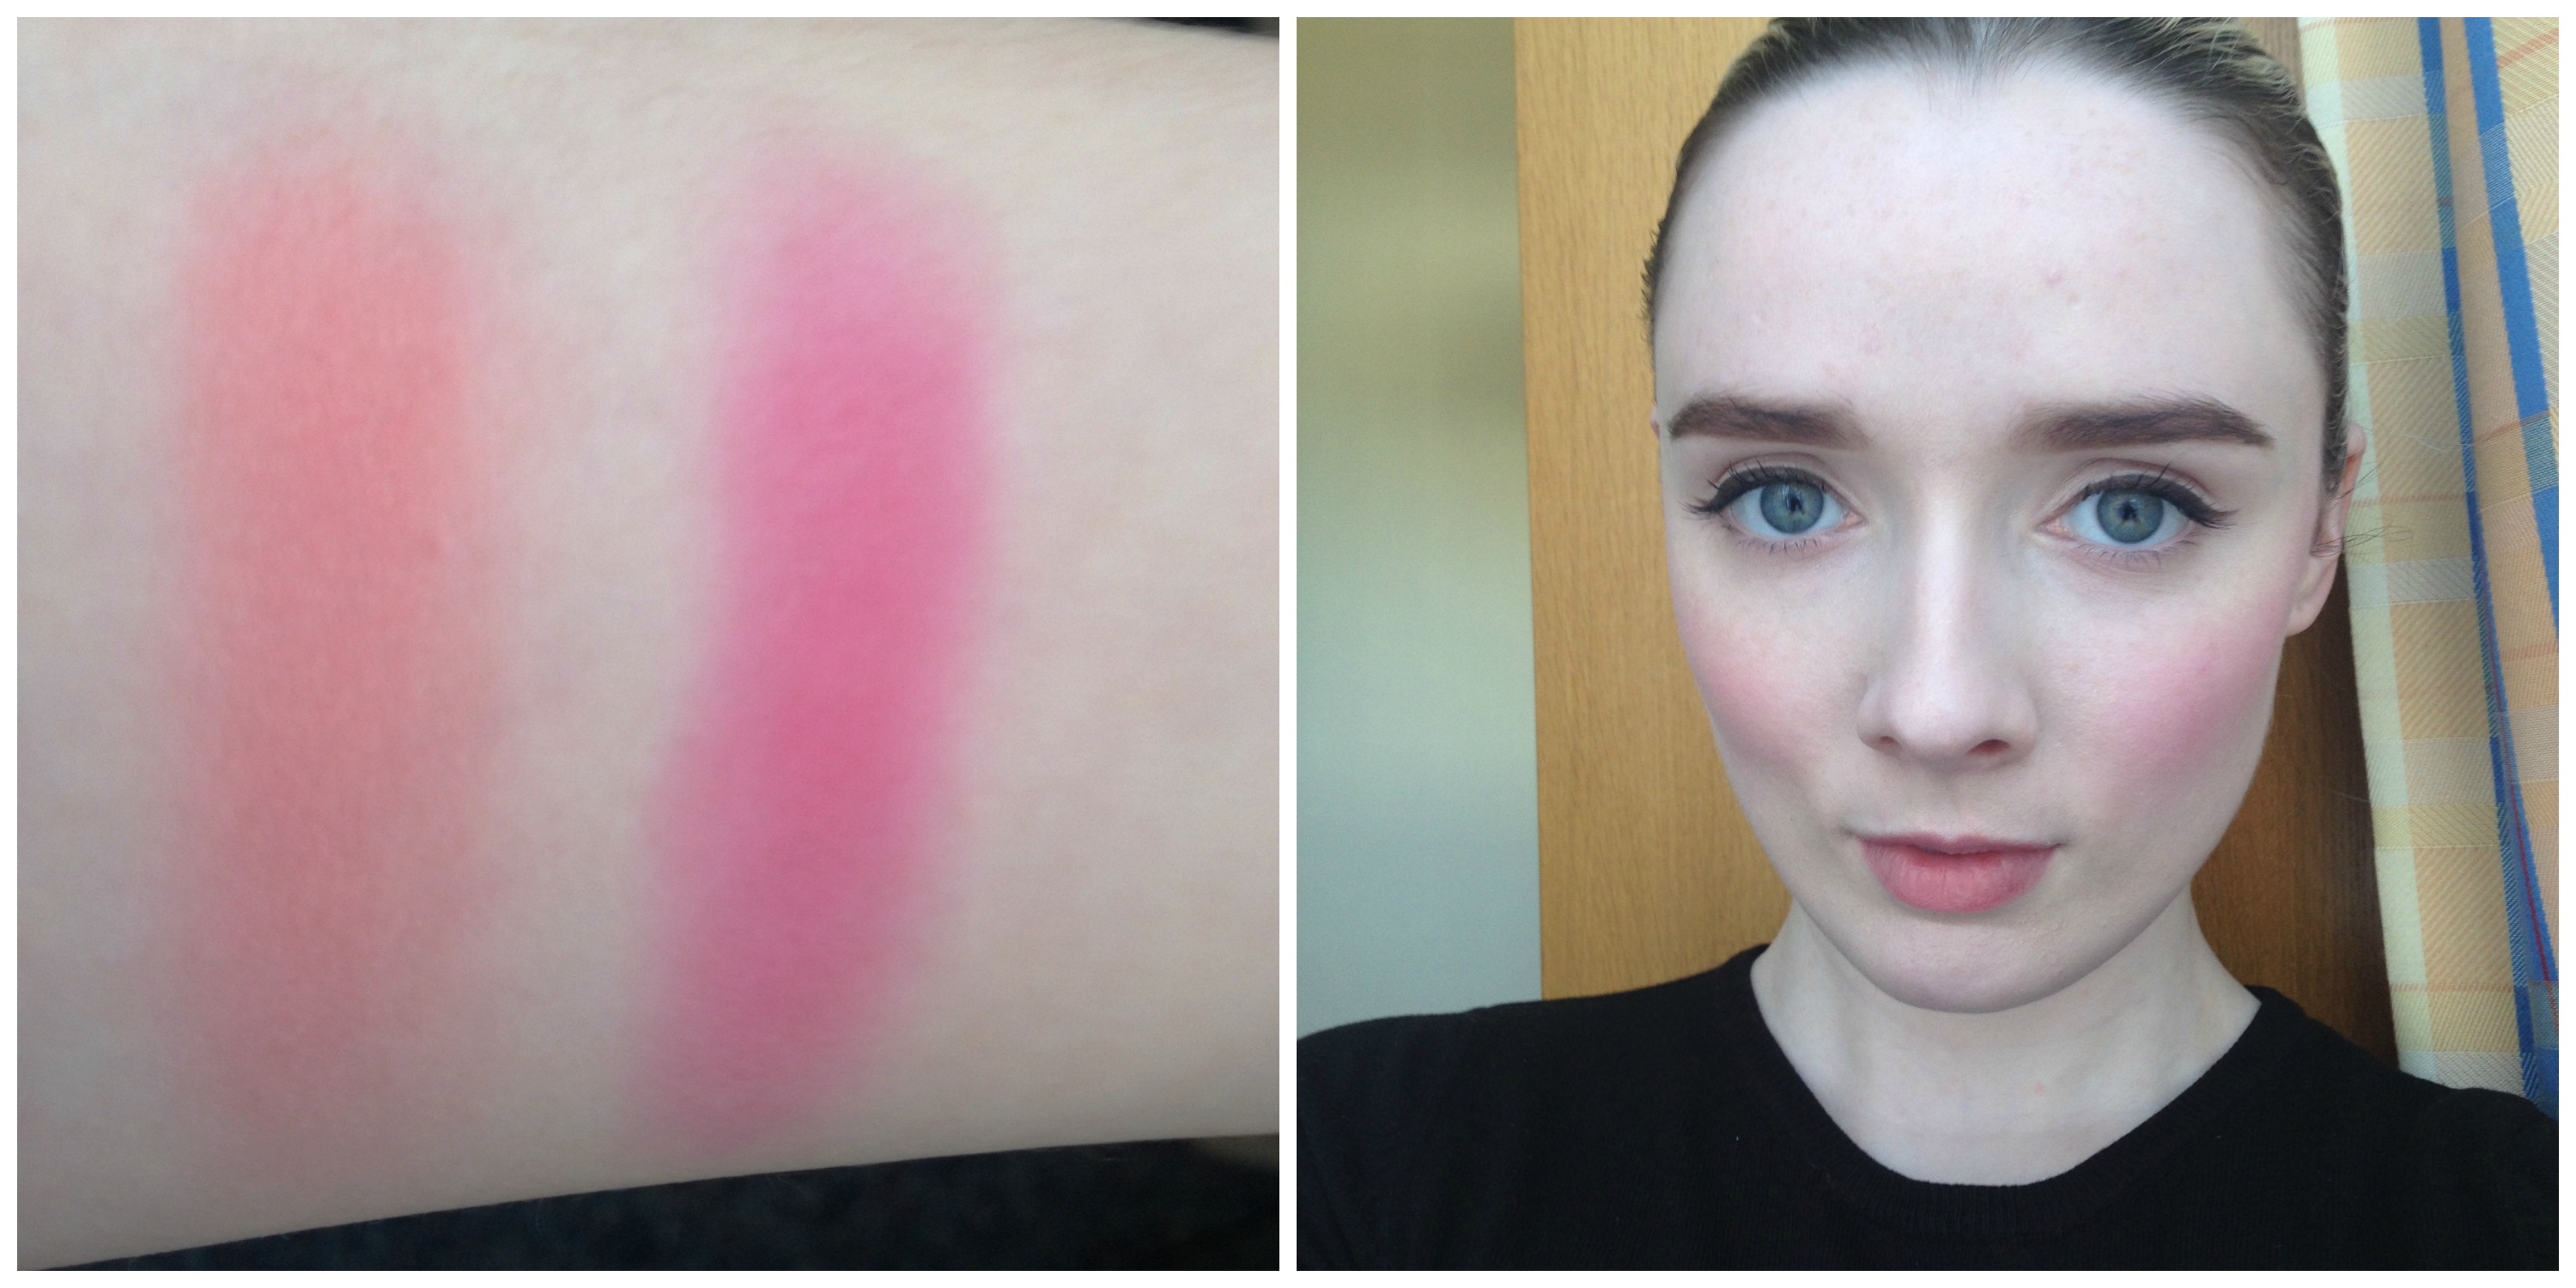 Cheek Pop Blush: Cheery Spring Release Put Some Gawjus Colour In Your Cheeks. Review, Pics, Swatches | Beaut.ie